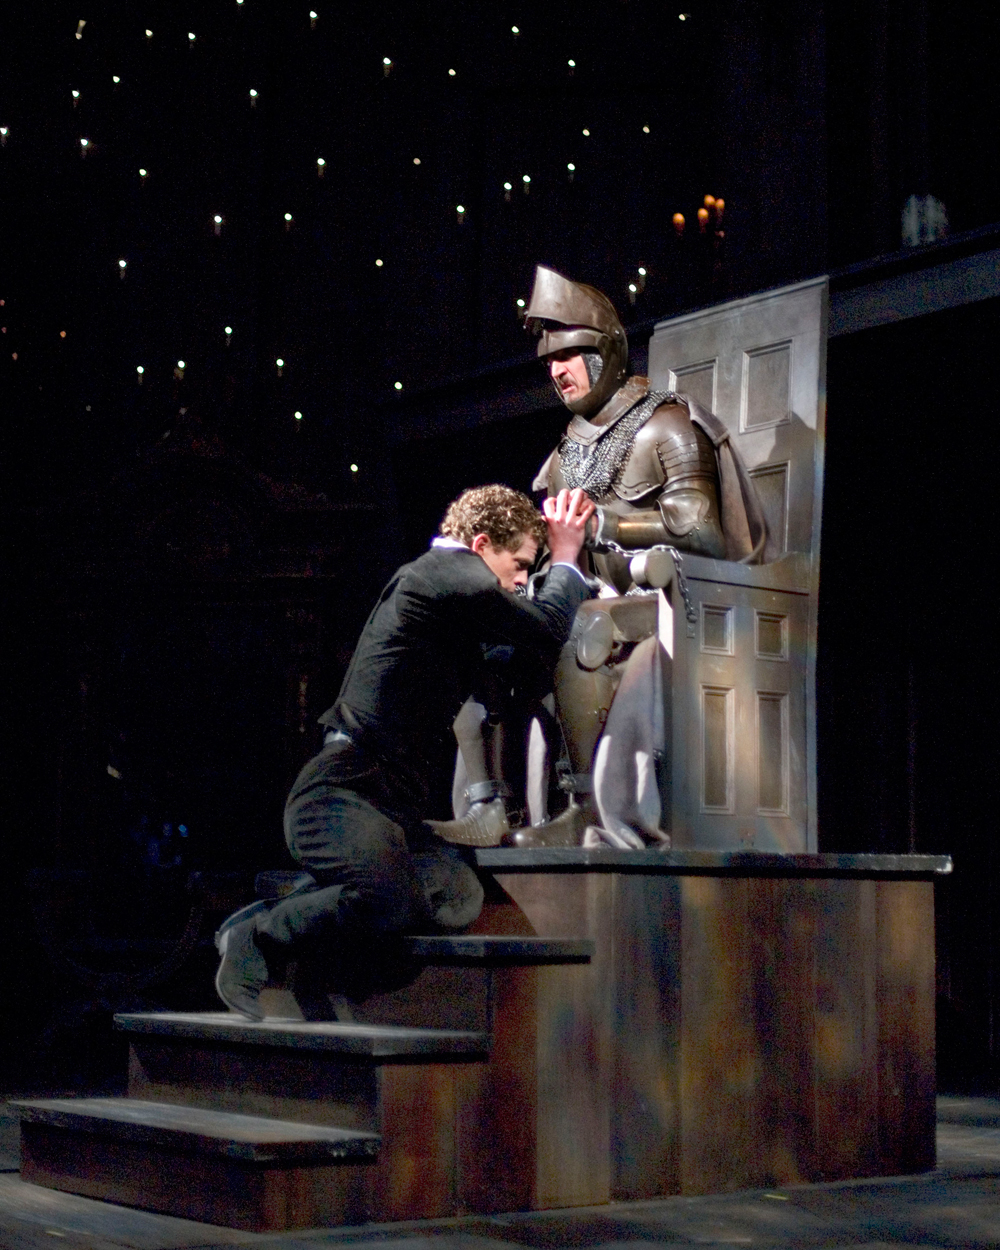 Lucas Hall and Bruce Turk in The Old Globe's 2007 production of Hamlet, directed by Darko Tresnjak. Photo by Craig Schwartz.